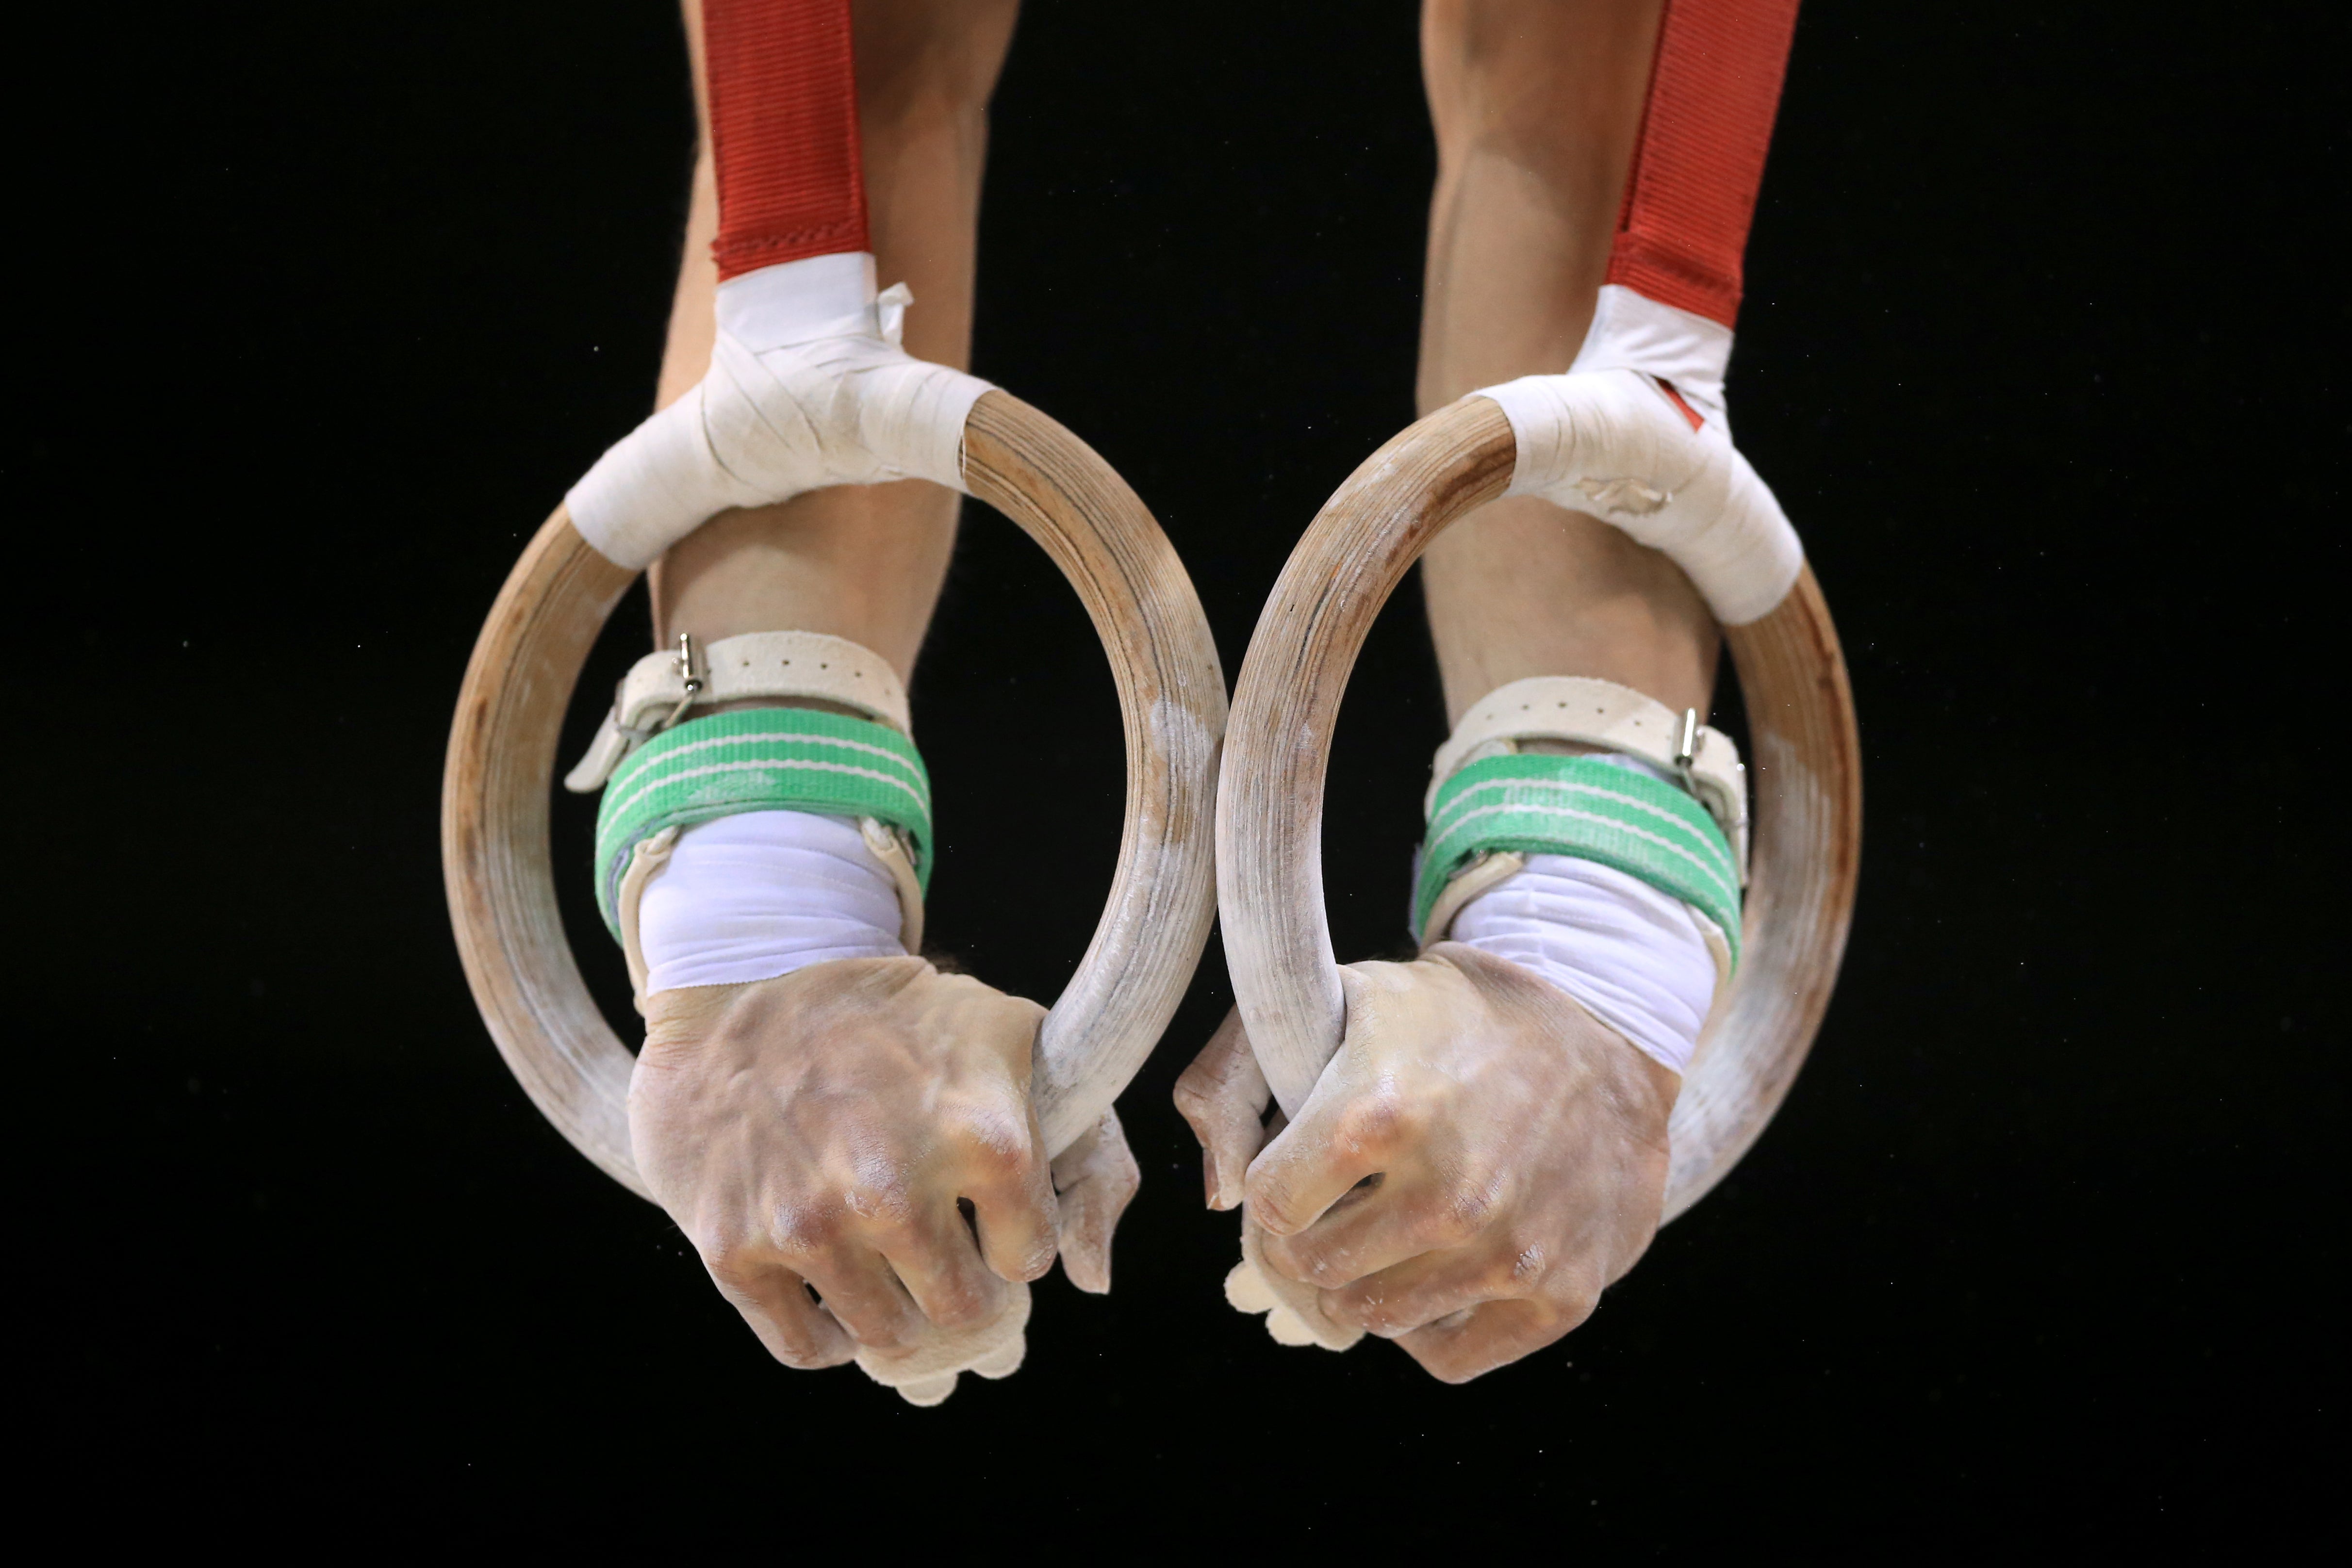 British Gymnastics has come under scrutiny after a damaging review found evidence of widespread abuse